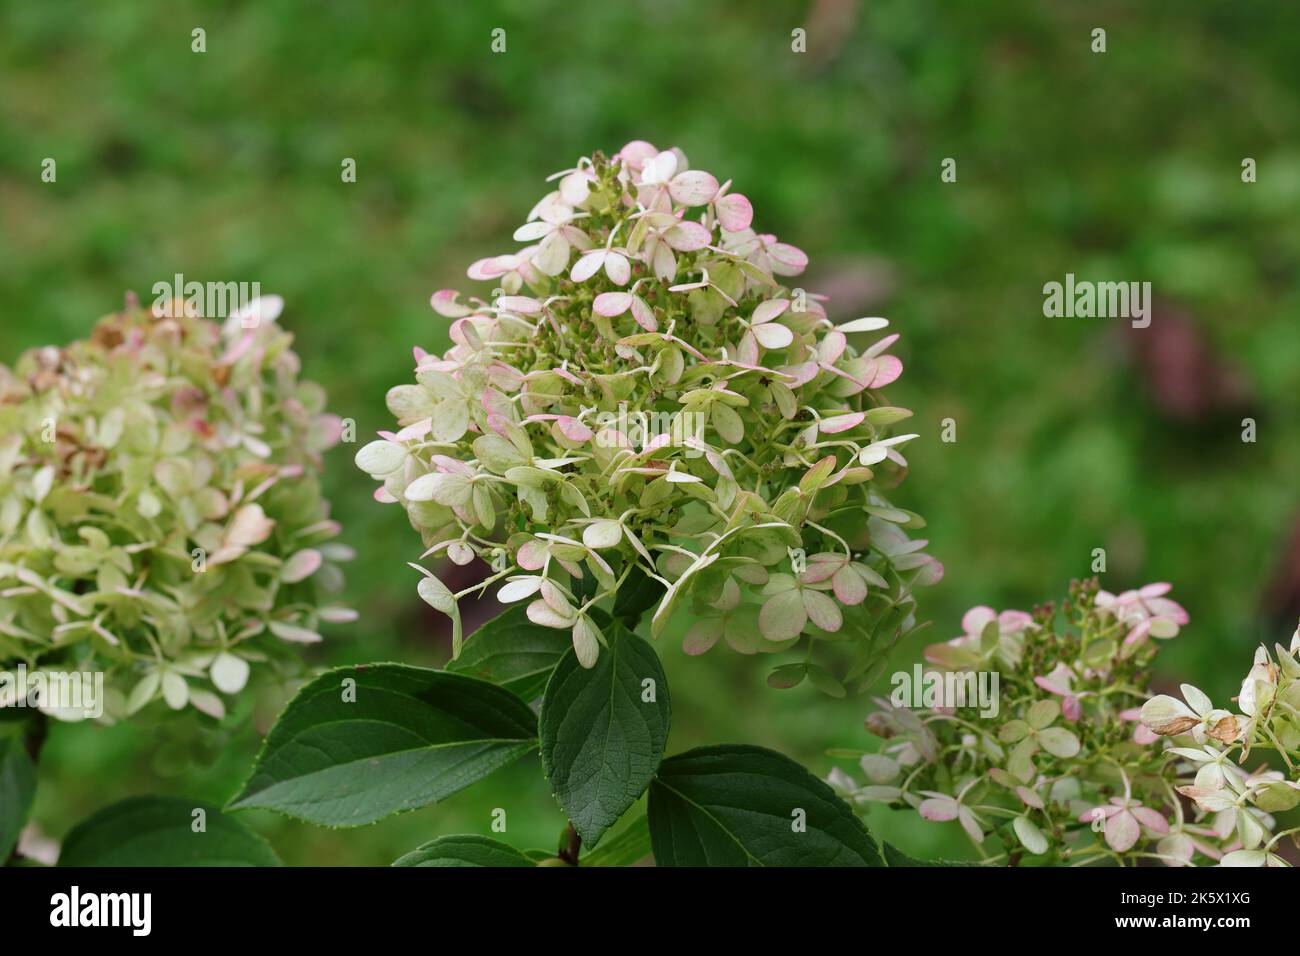 close-up of white withering flowers of a hydrangea paniculata with first autumn discoloration against a green natural background Stock Photo